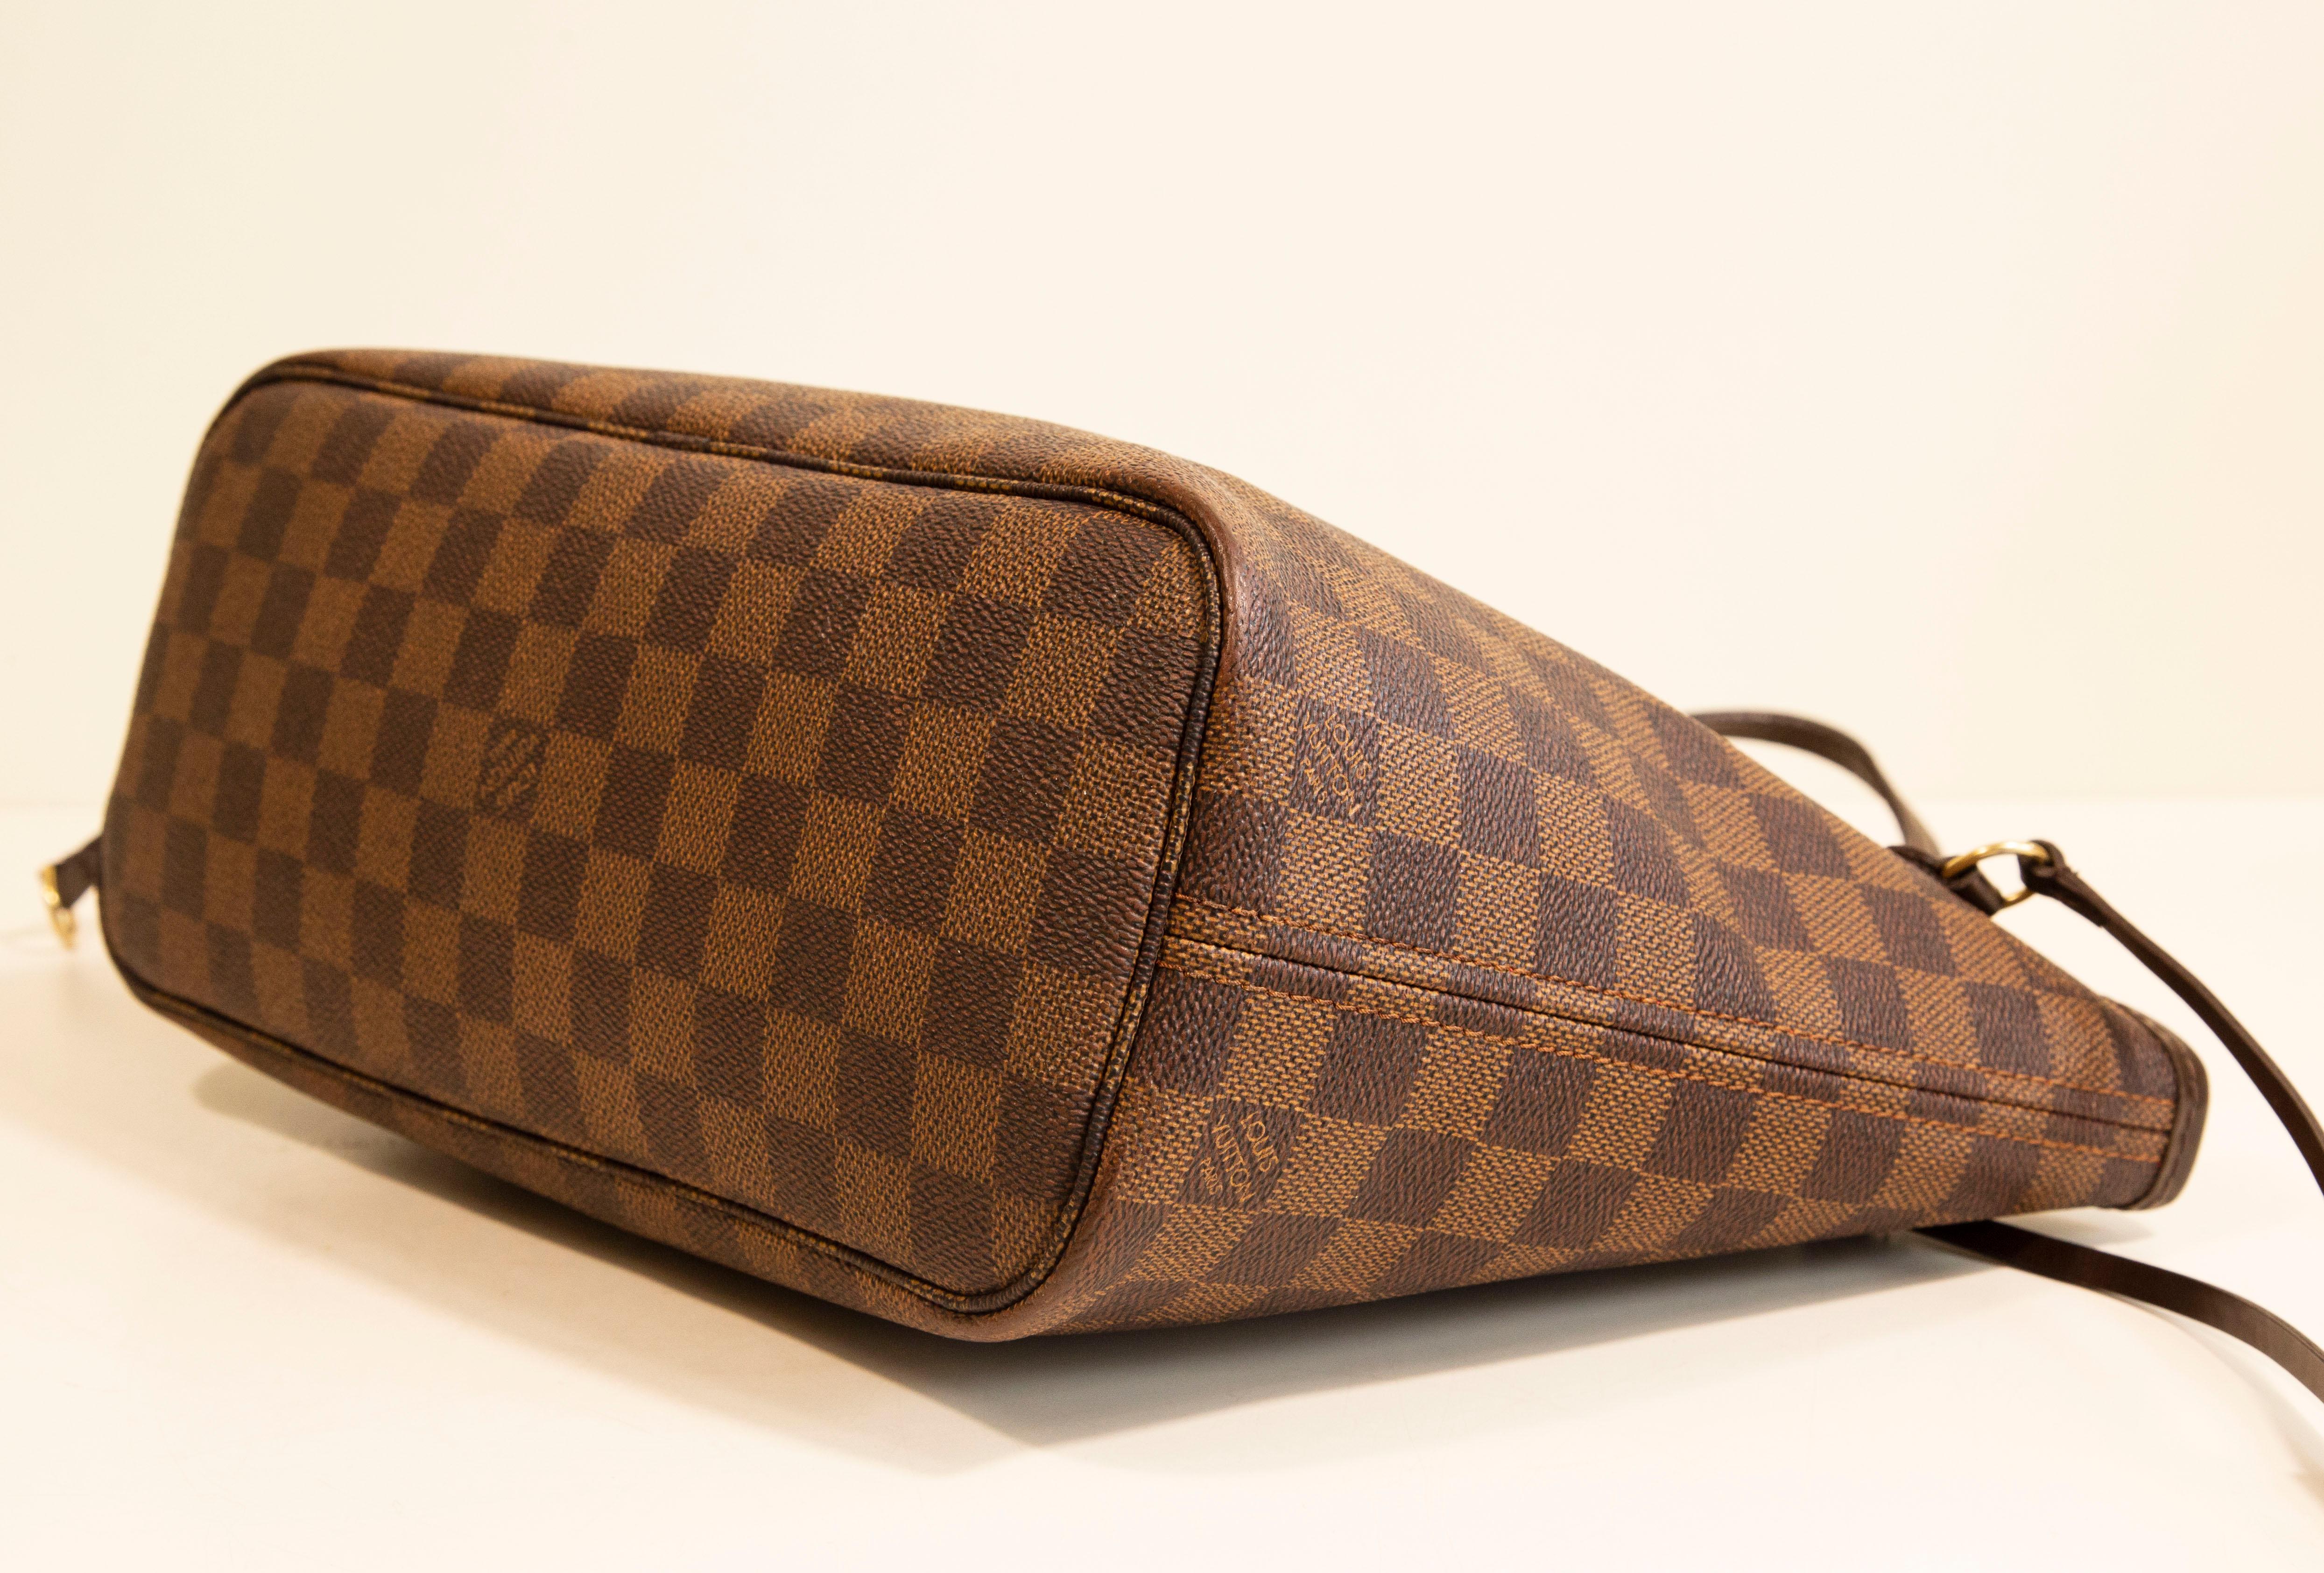 Louis Vuitton Neverfull PM Tote Shoulder Bag in Damier Ebene For Sale 10